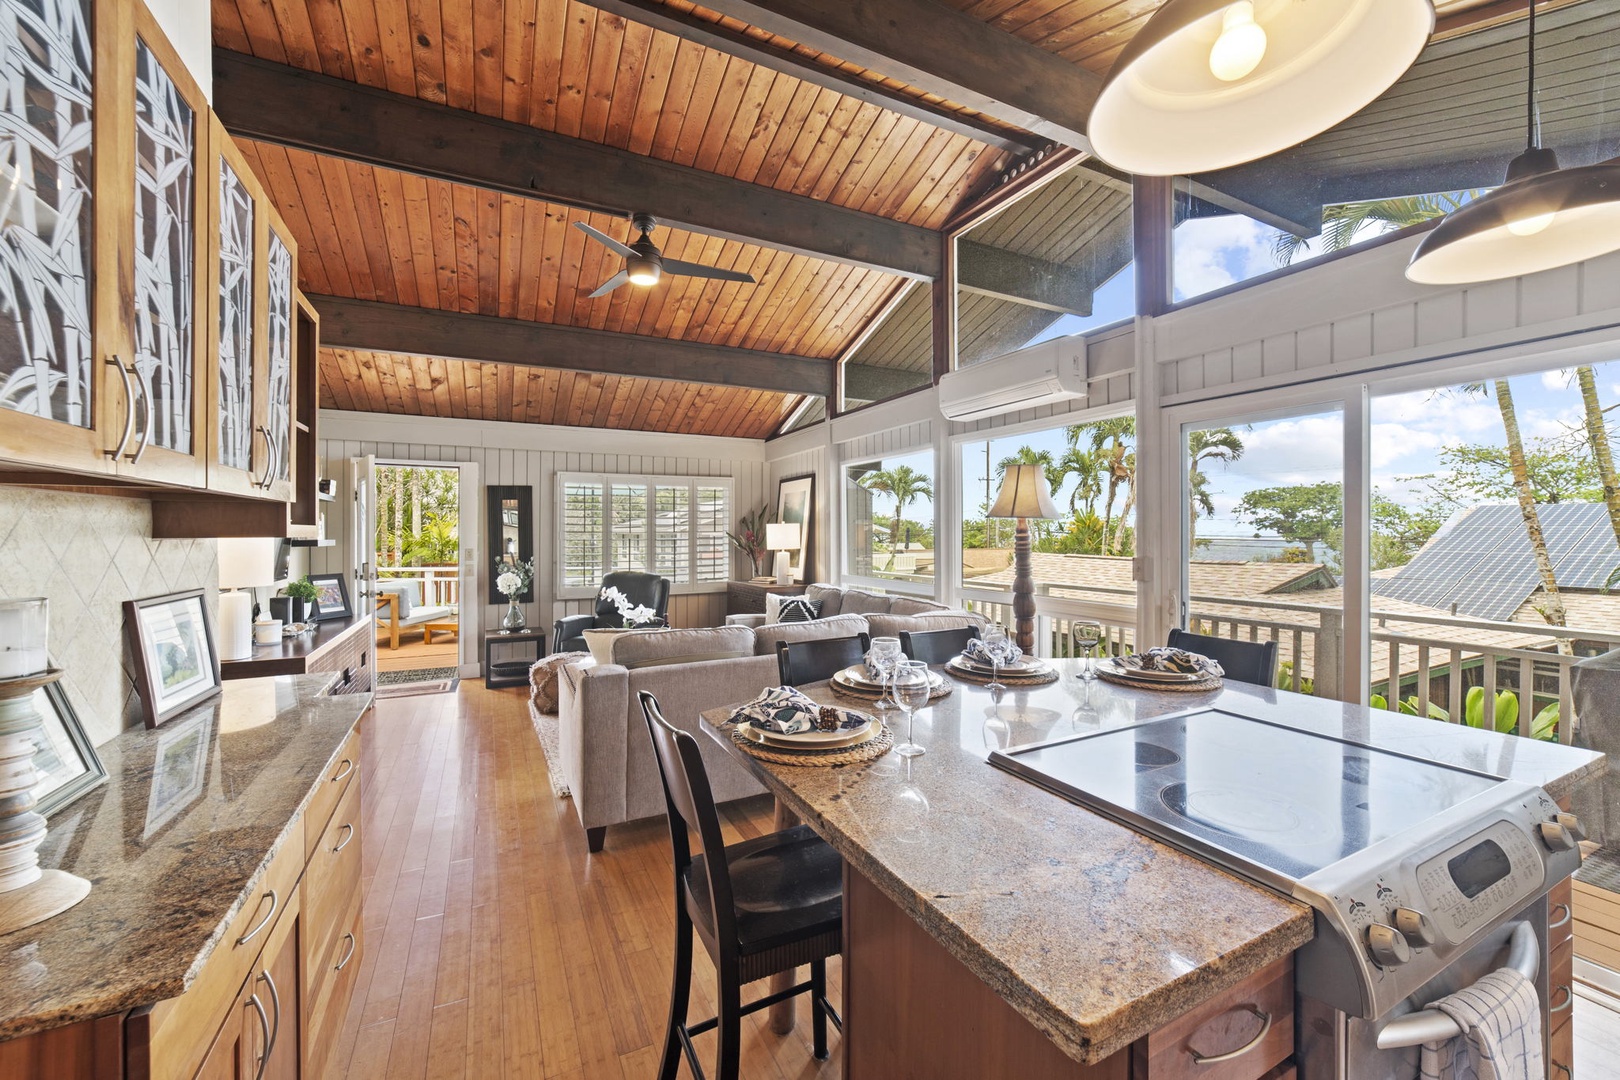 Kaaawa Vacation Rentals, Pali Kai - Open concept living and kitchen area with split A/C